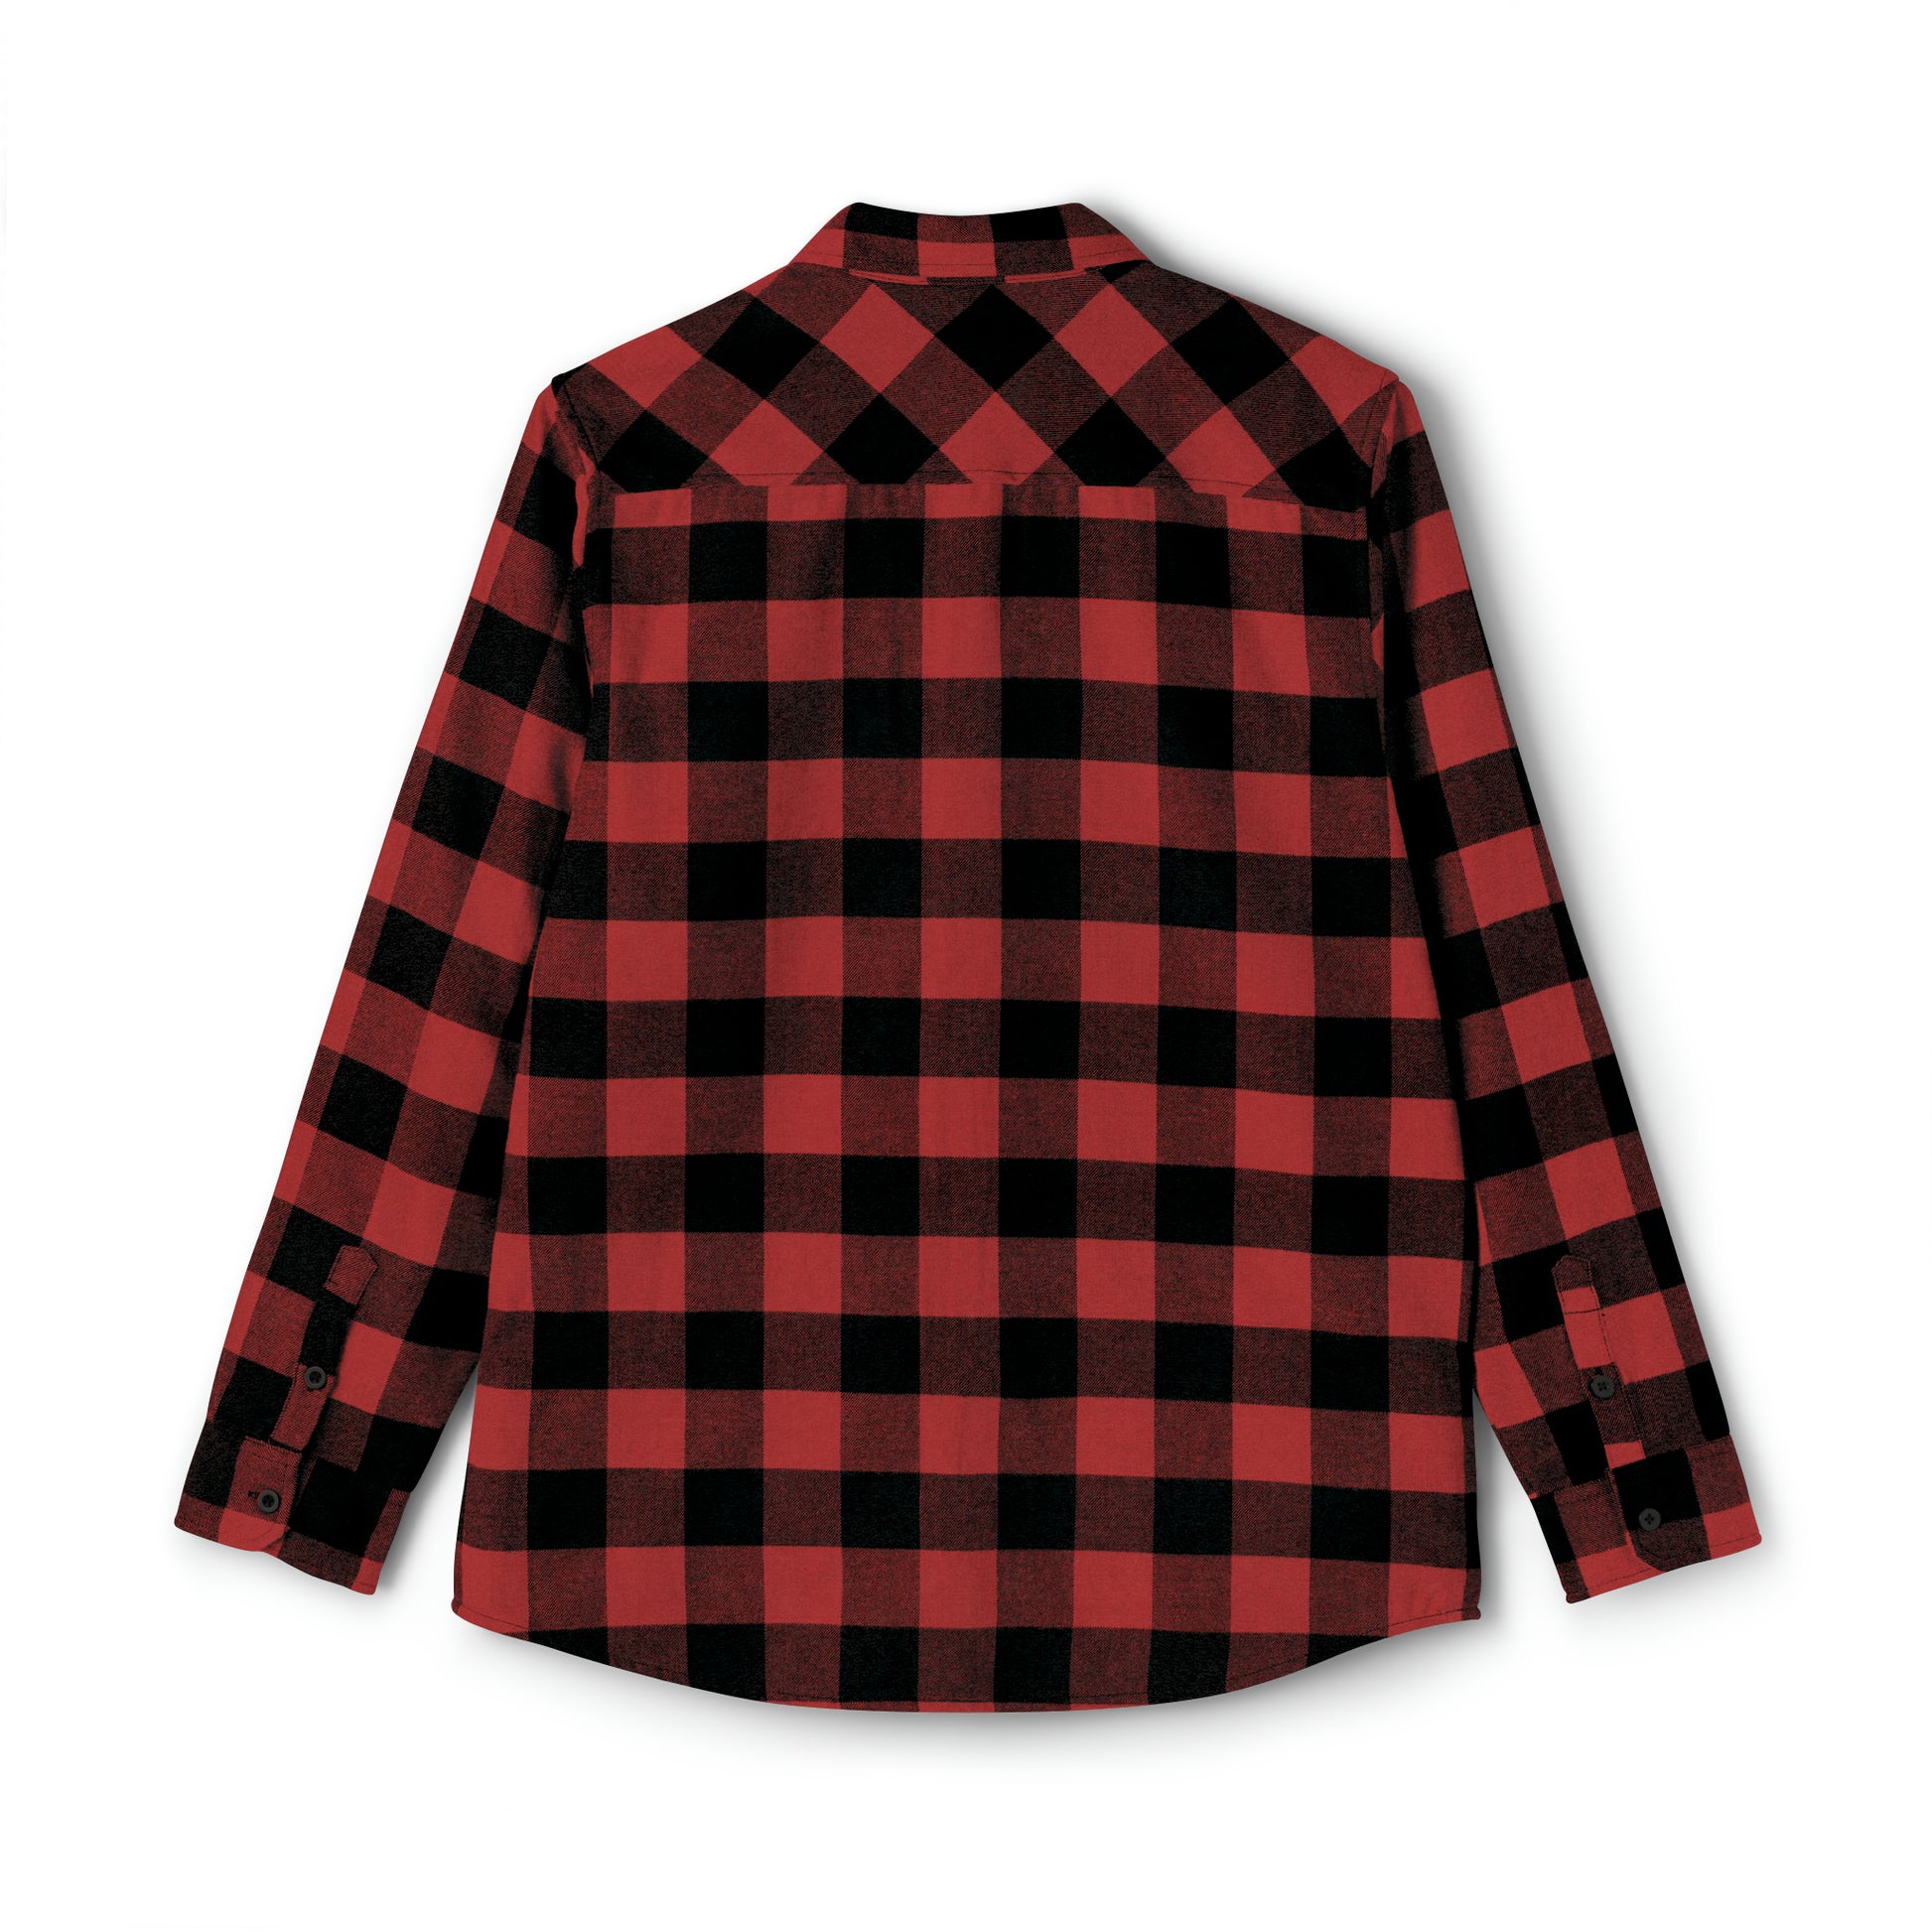 A red and black Printify Unisex Flannel Shirt on a white background.